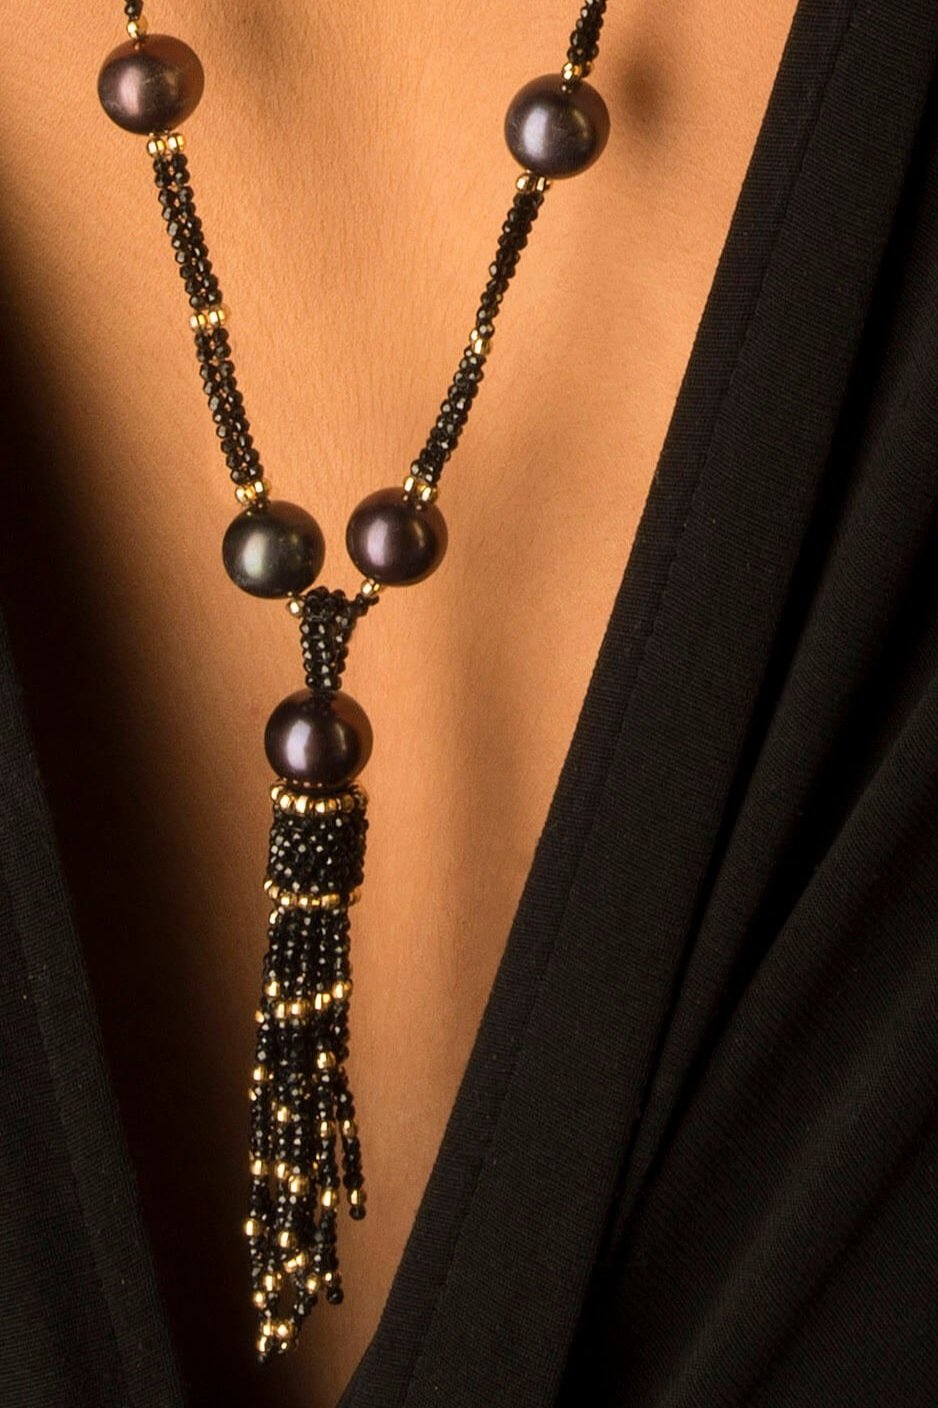 Deco Tassel.  The tassel is hand woven of black spinel,  and 14k beads,  with a Tahitian pearl positioned at the top.  The tassel hangs from a very long necklace made of the same materials.